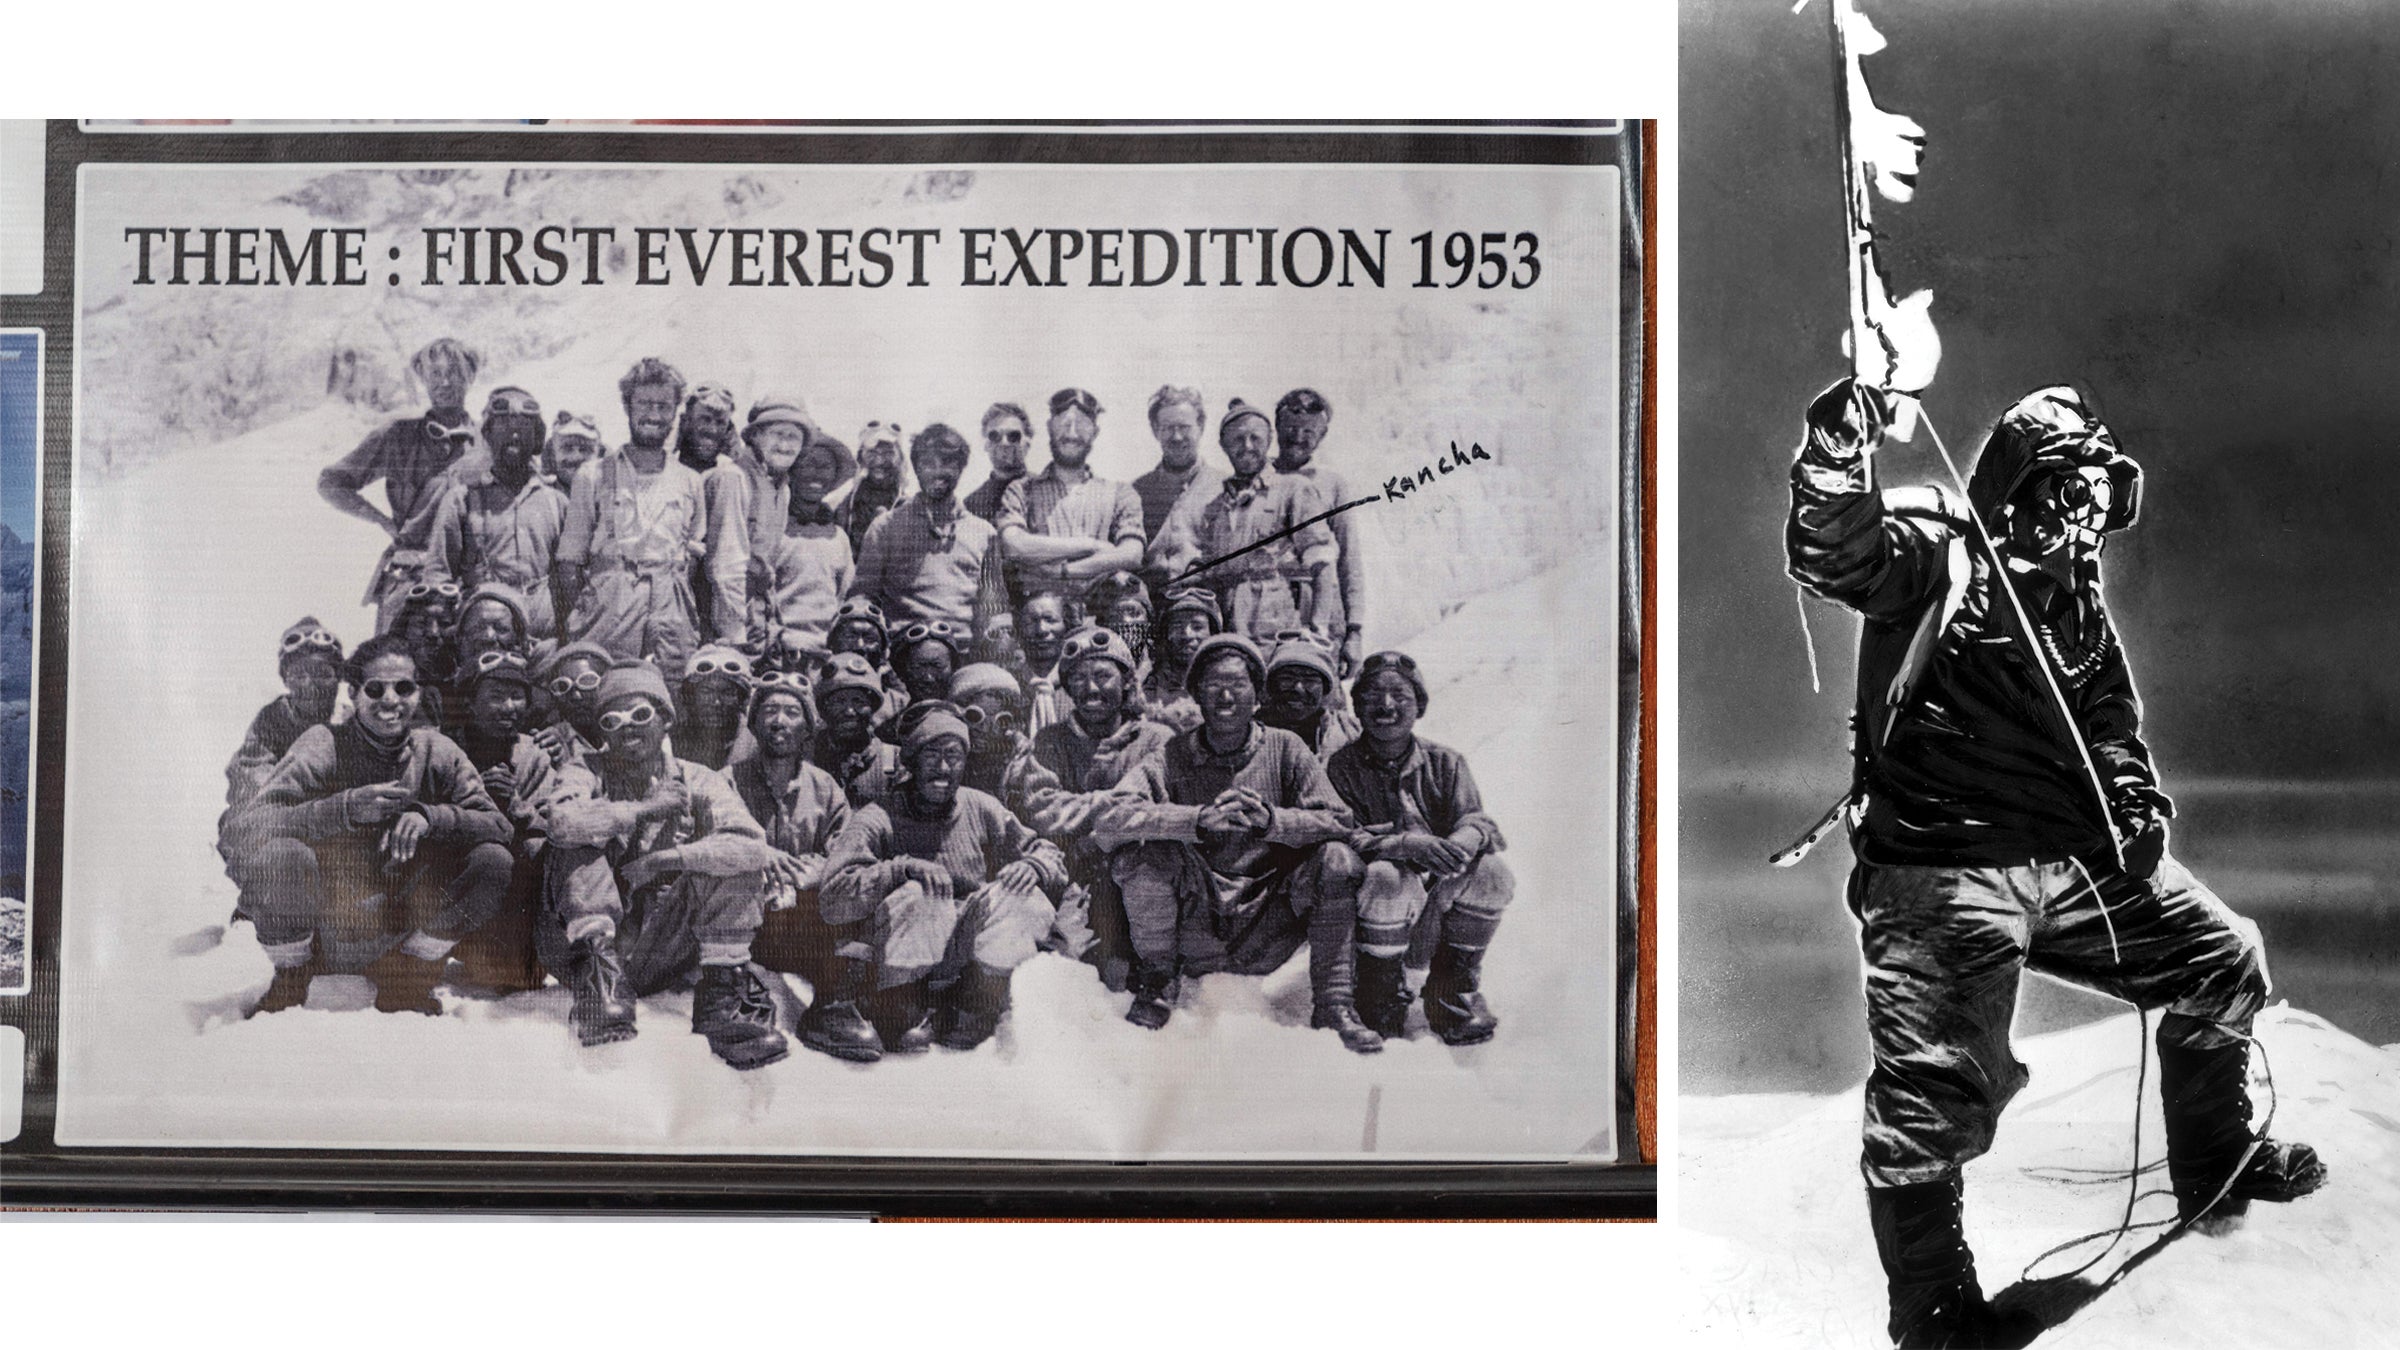 Left: a group shot of the 1953 British expedition team. Right: Tenzing on the summit.